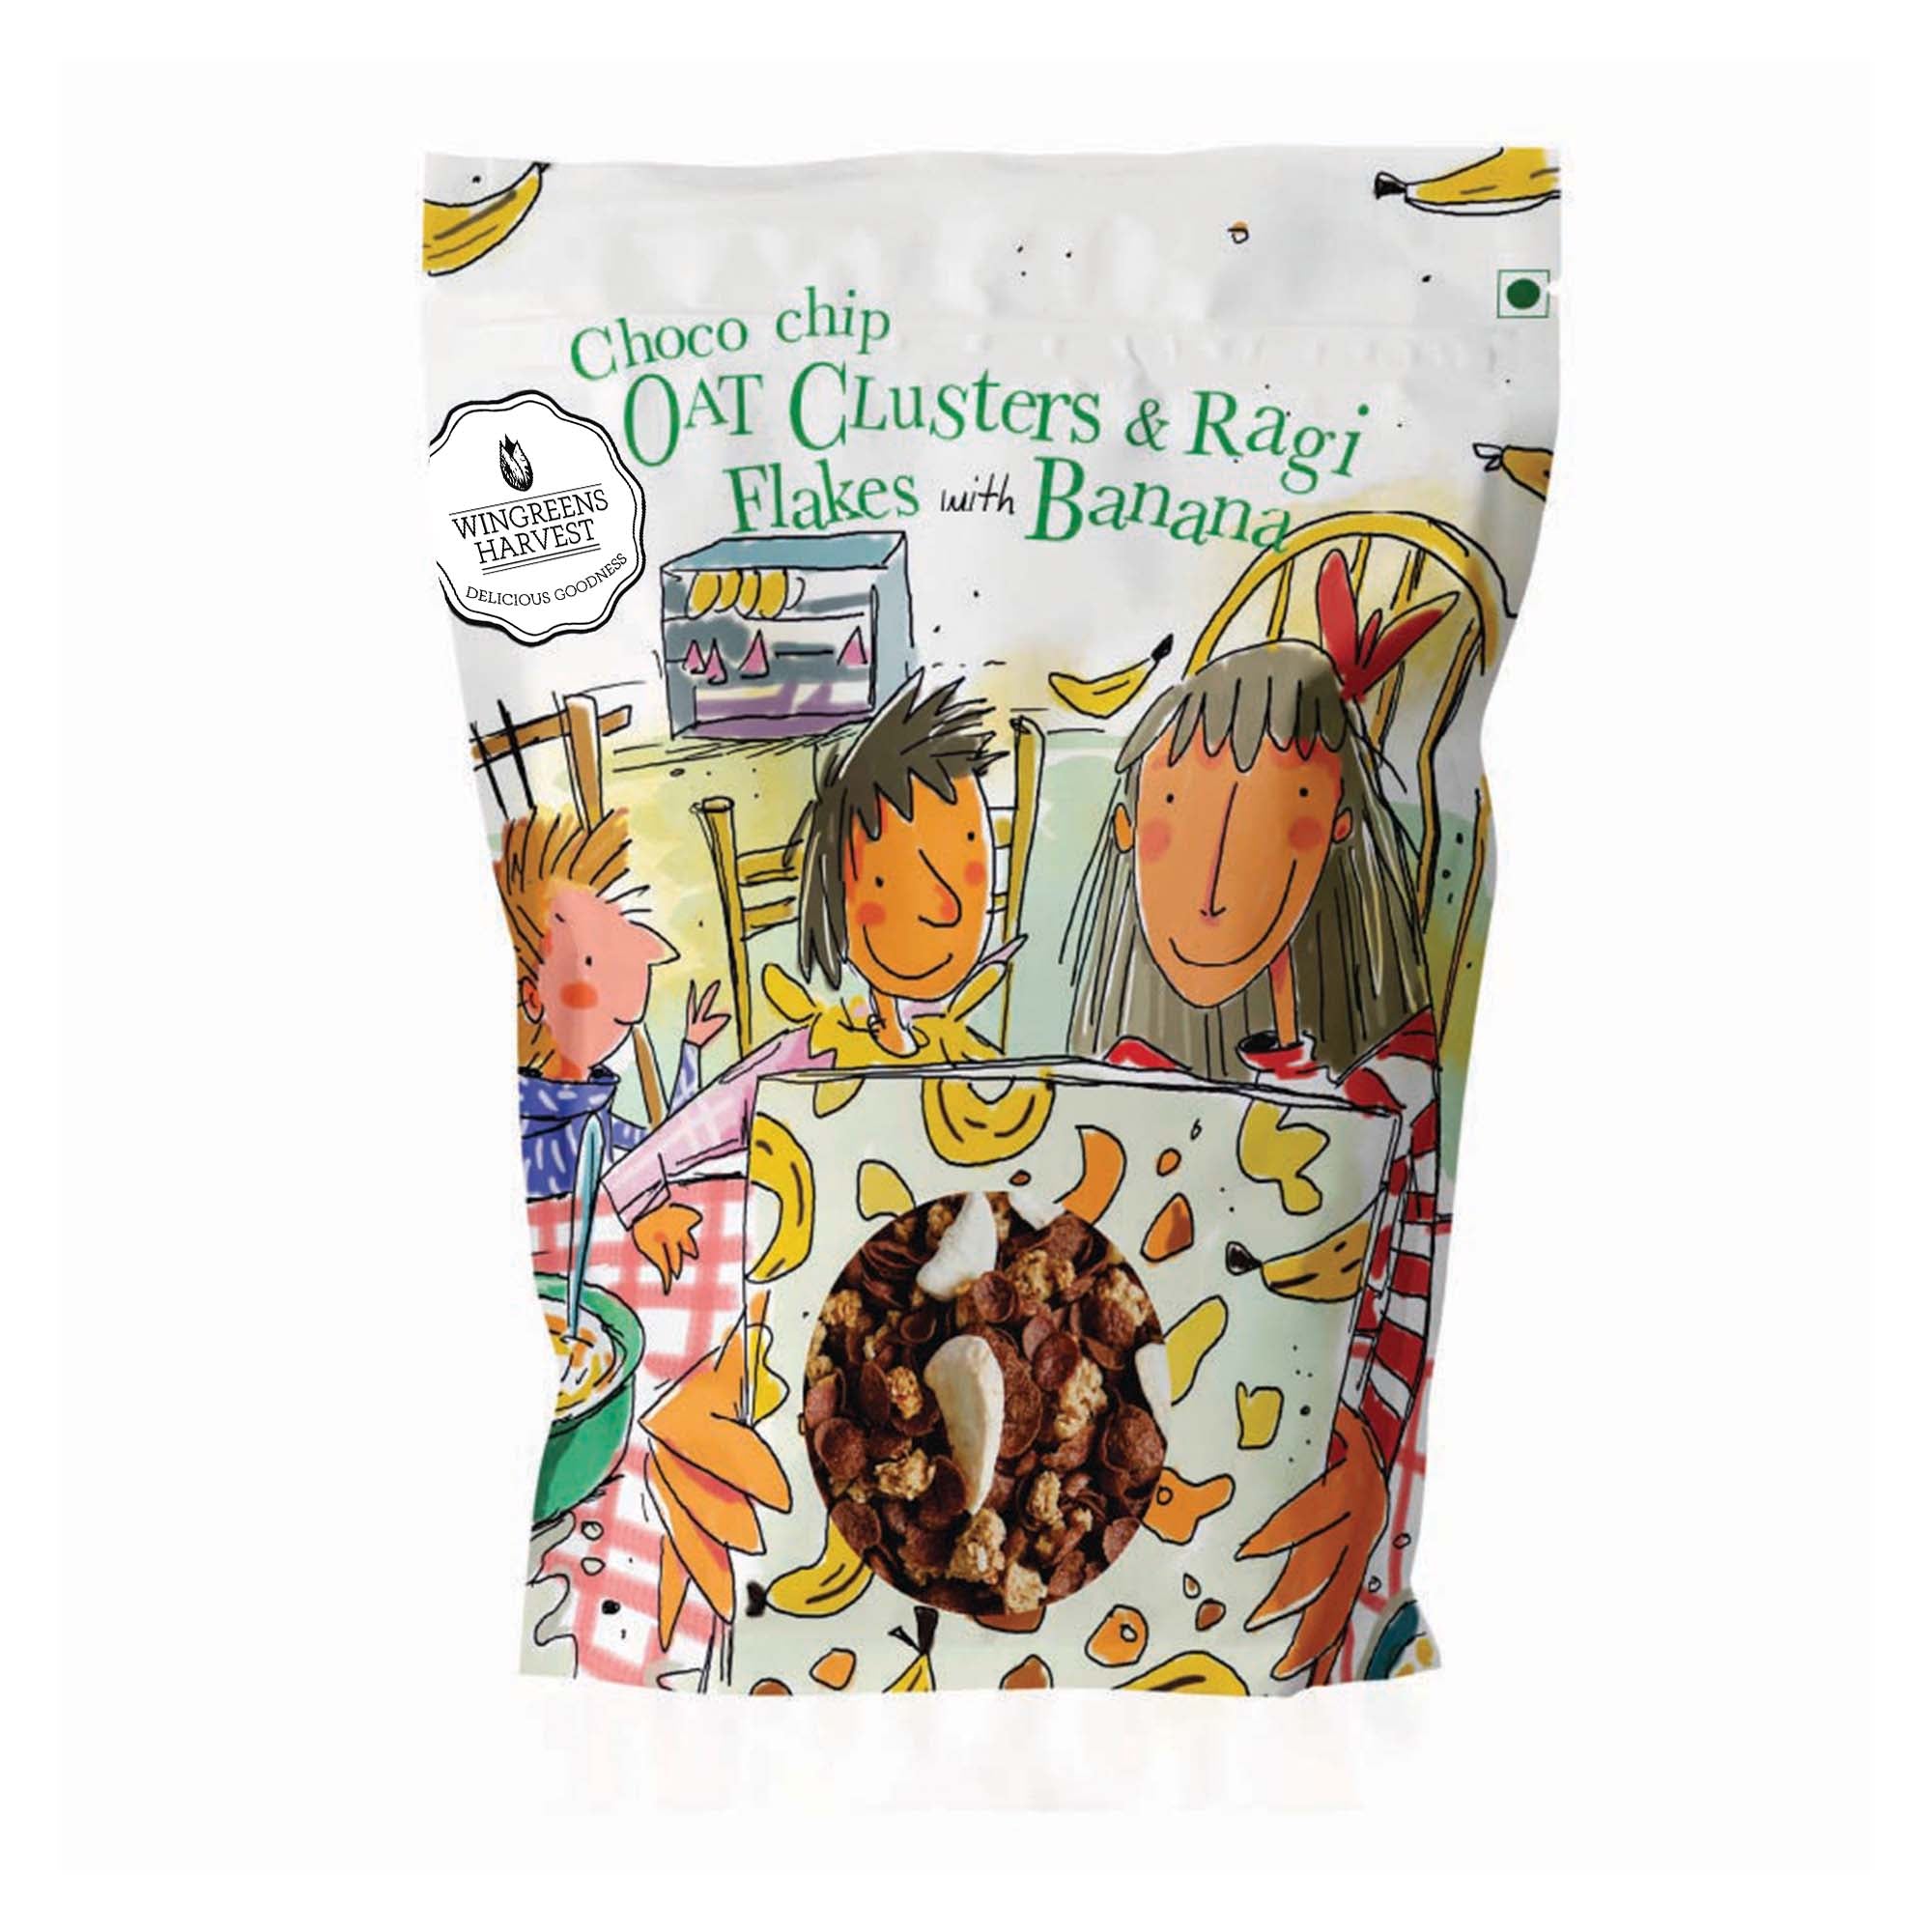 Breakfast Cereal - Choco chip Oat Clusters & Ragi Flakes with Banana - 1 KG